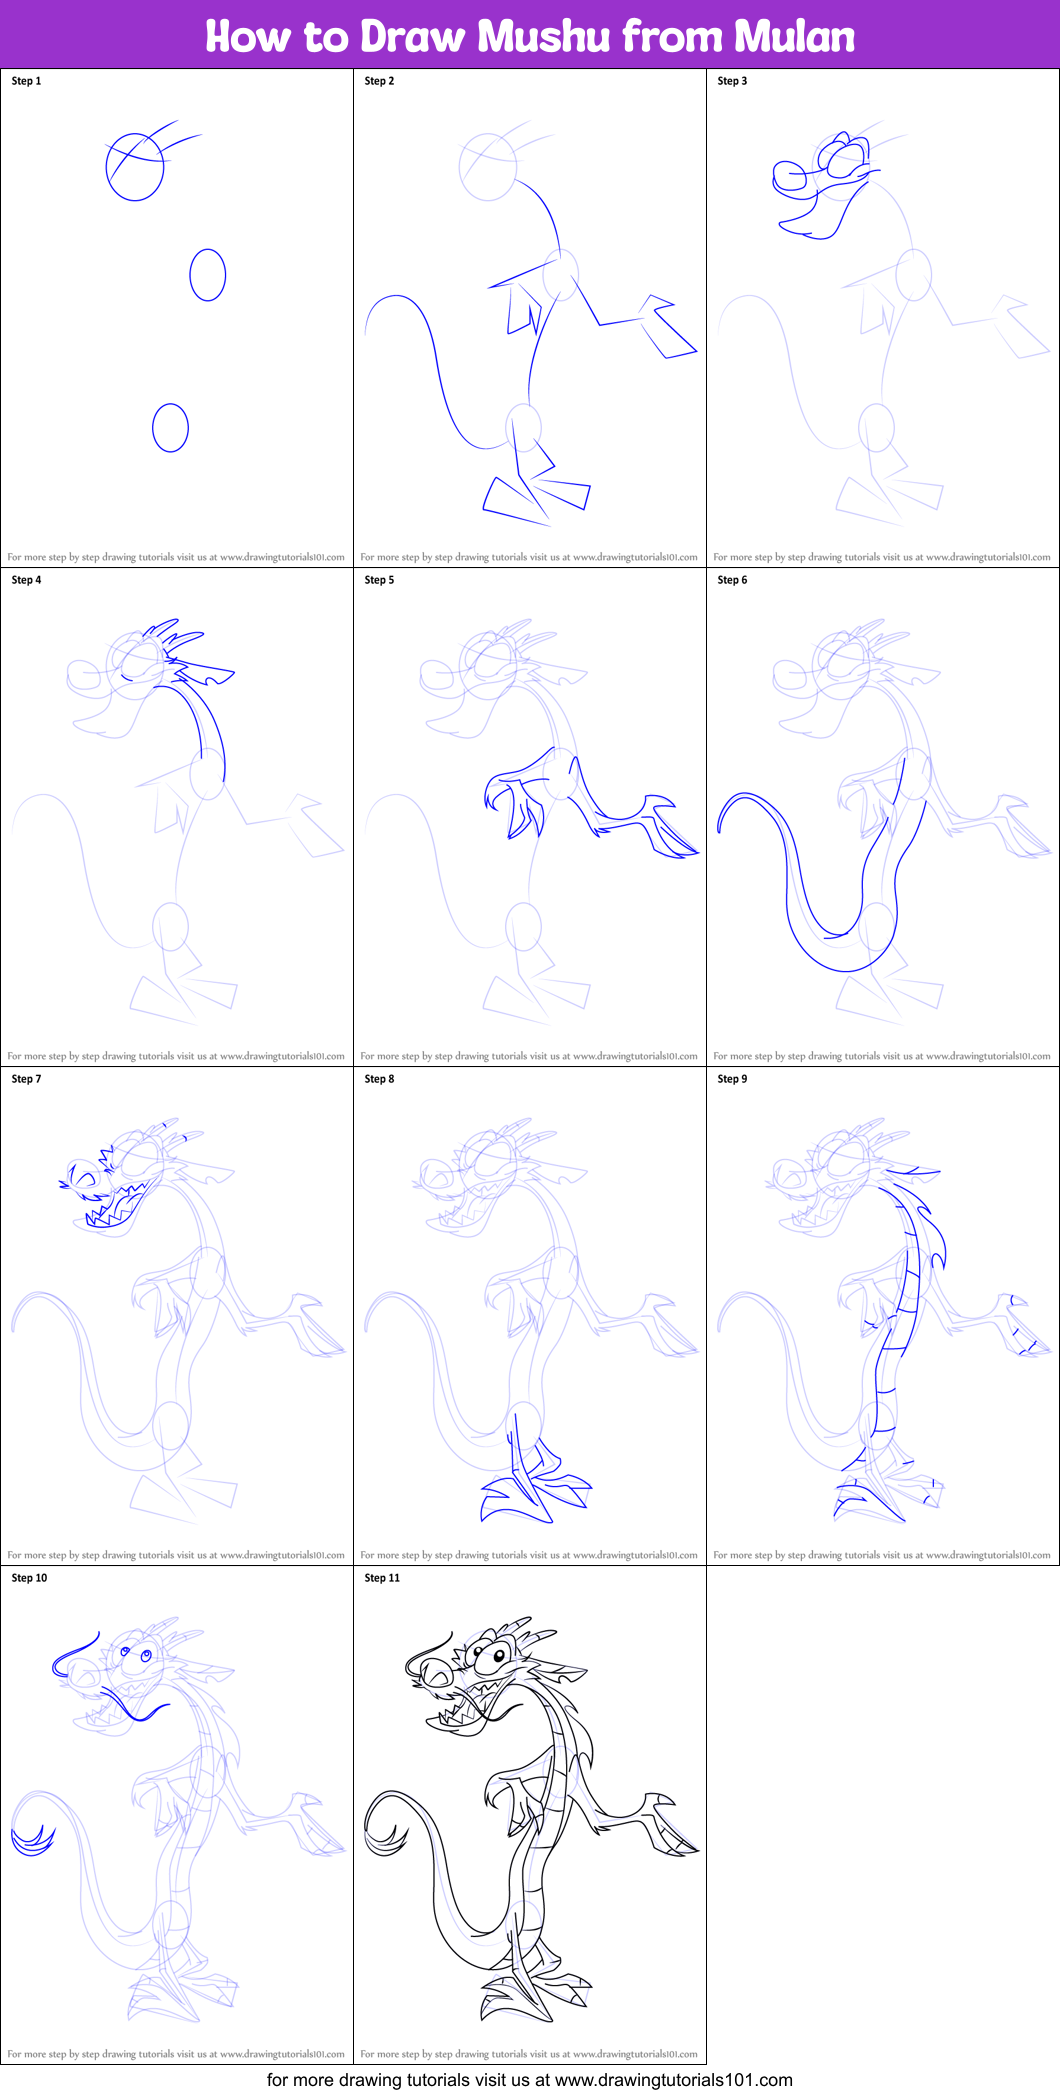 How to Draw Mushu from Mulan printable step by step drawing sheet